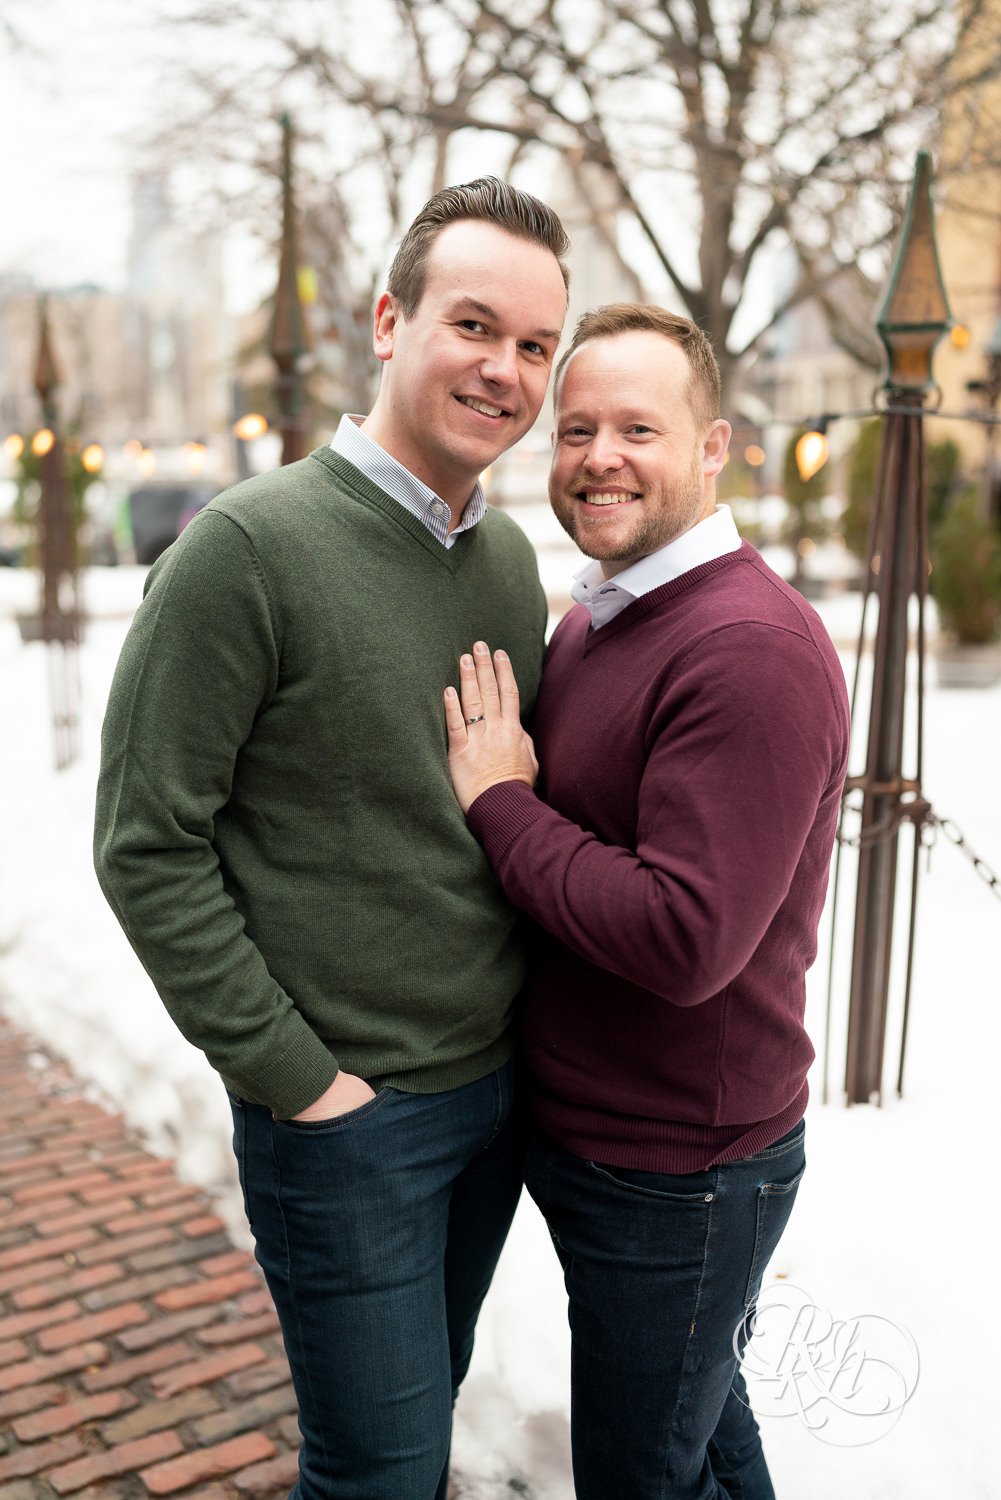 Gay men smile in snow during the winter in Minneapolis, Minnesota.